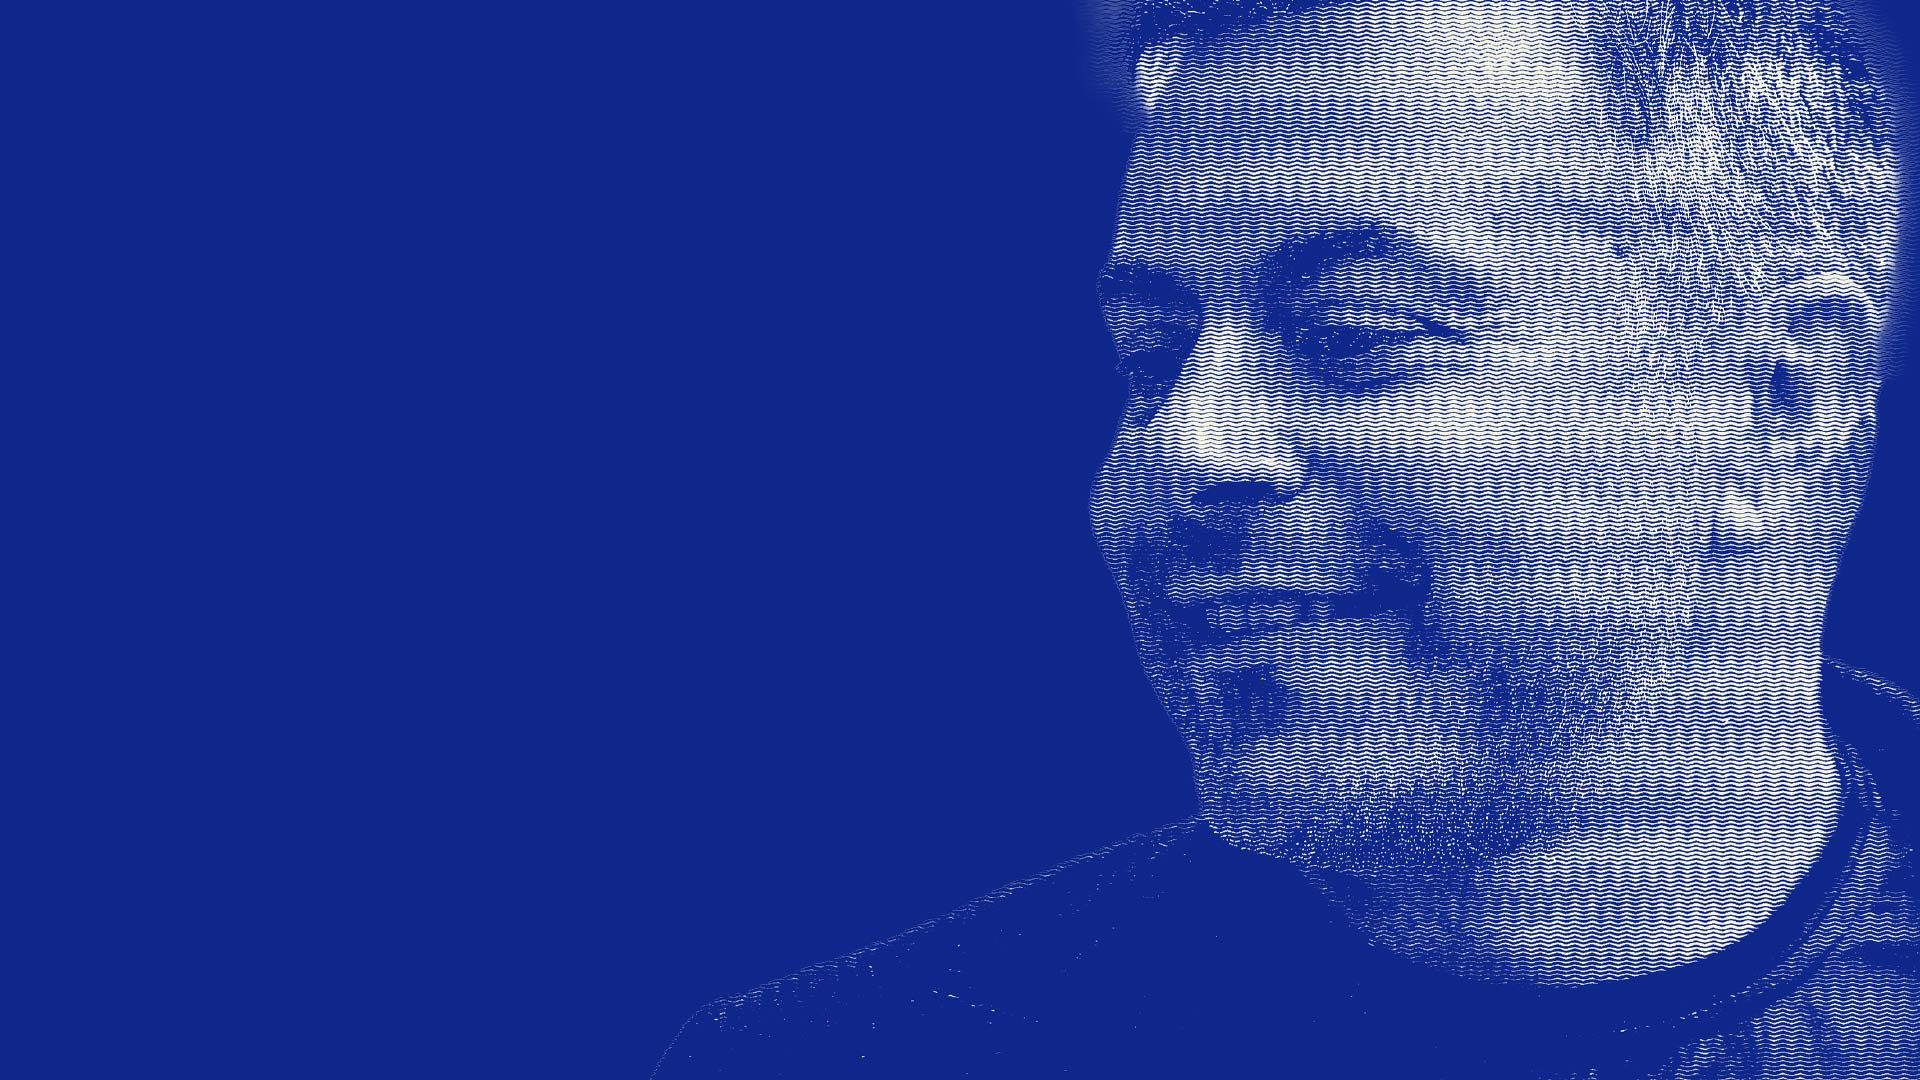 An image of Andrea Radrizzani smiling against a blue backdrop